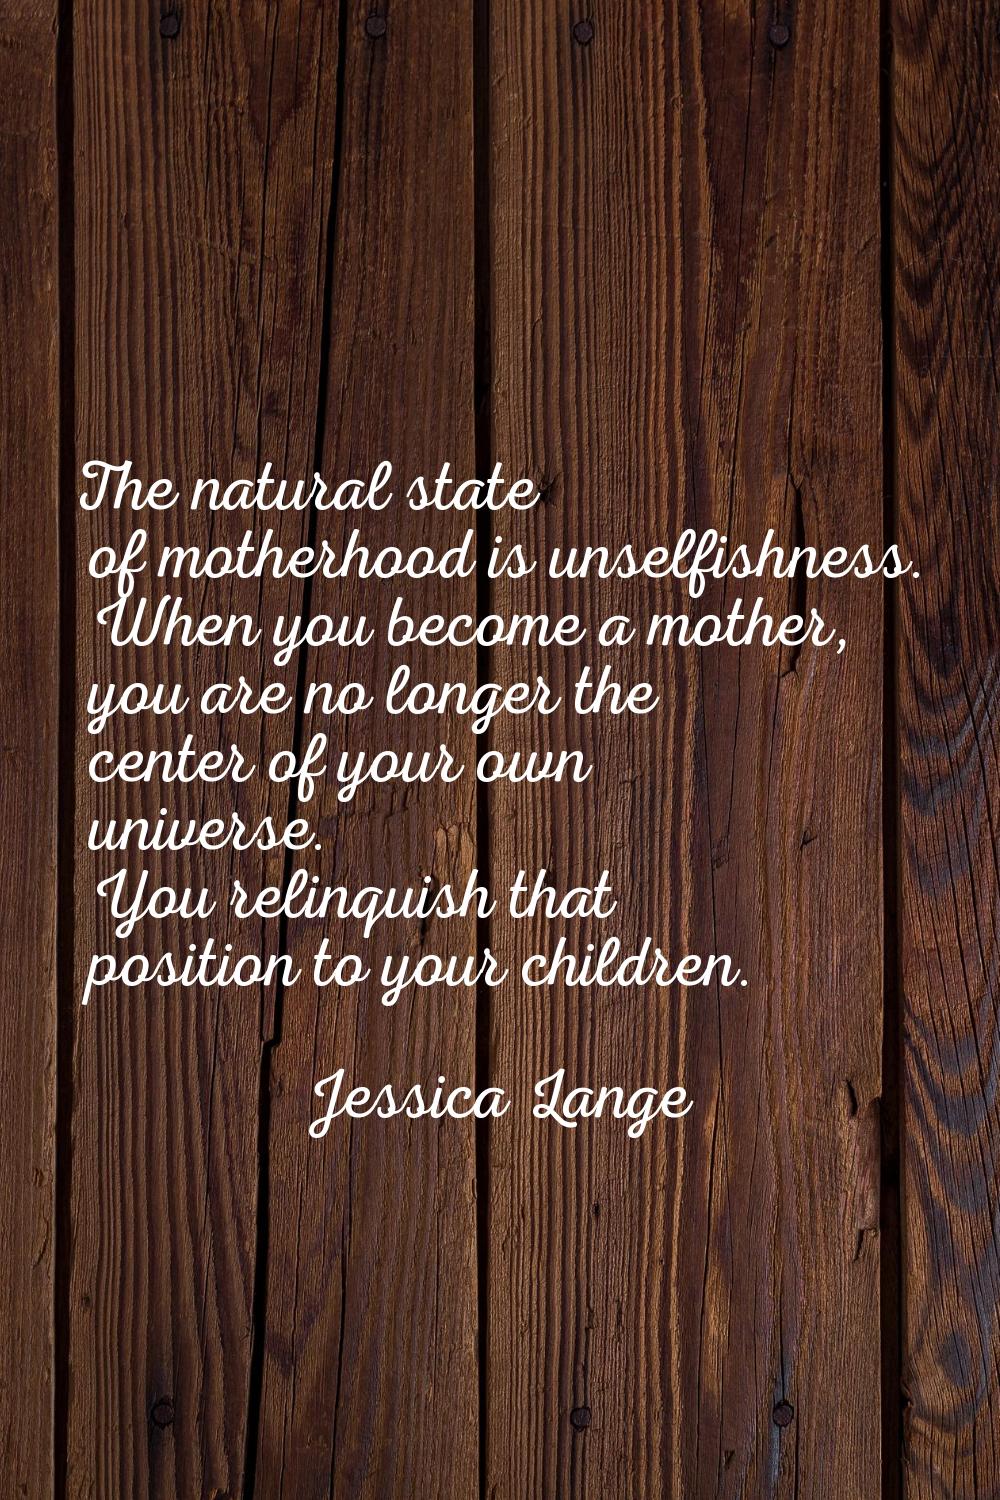 The natural state of motherhood is unselfishness. When you become a mother, you are no longer the c